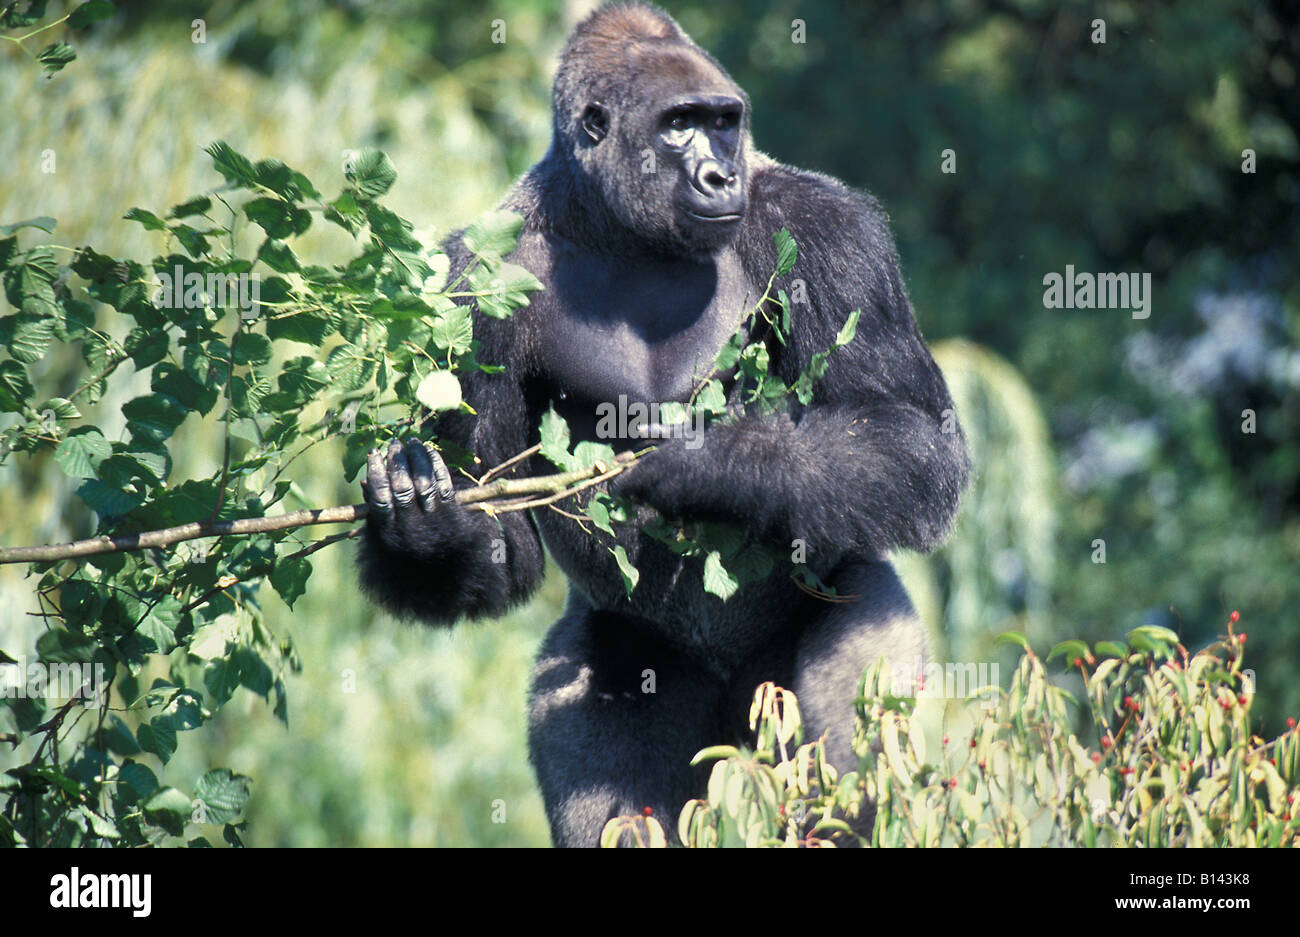 Western Lowland Gorilla Gorilla gorilla gorilla native to Western and Central Africa Africa CENTRAL GORILLA LOWLAND NATIVE WESTE Stock Photo